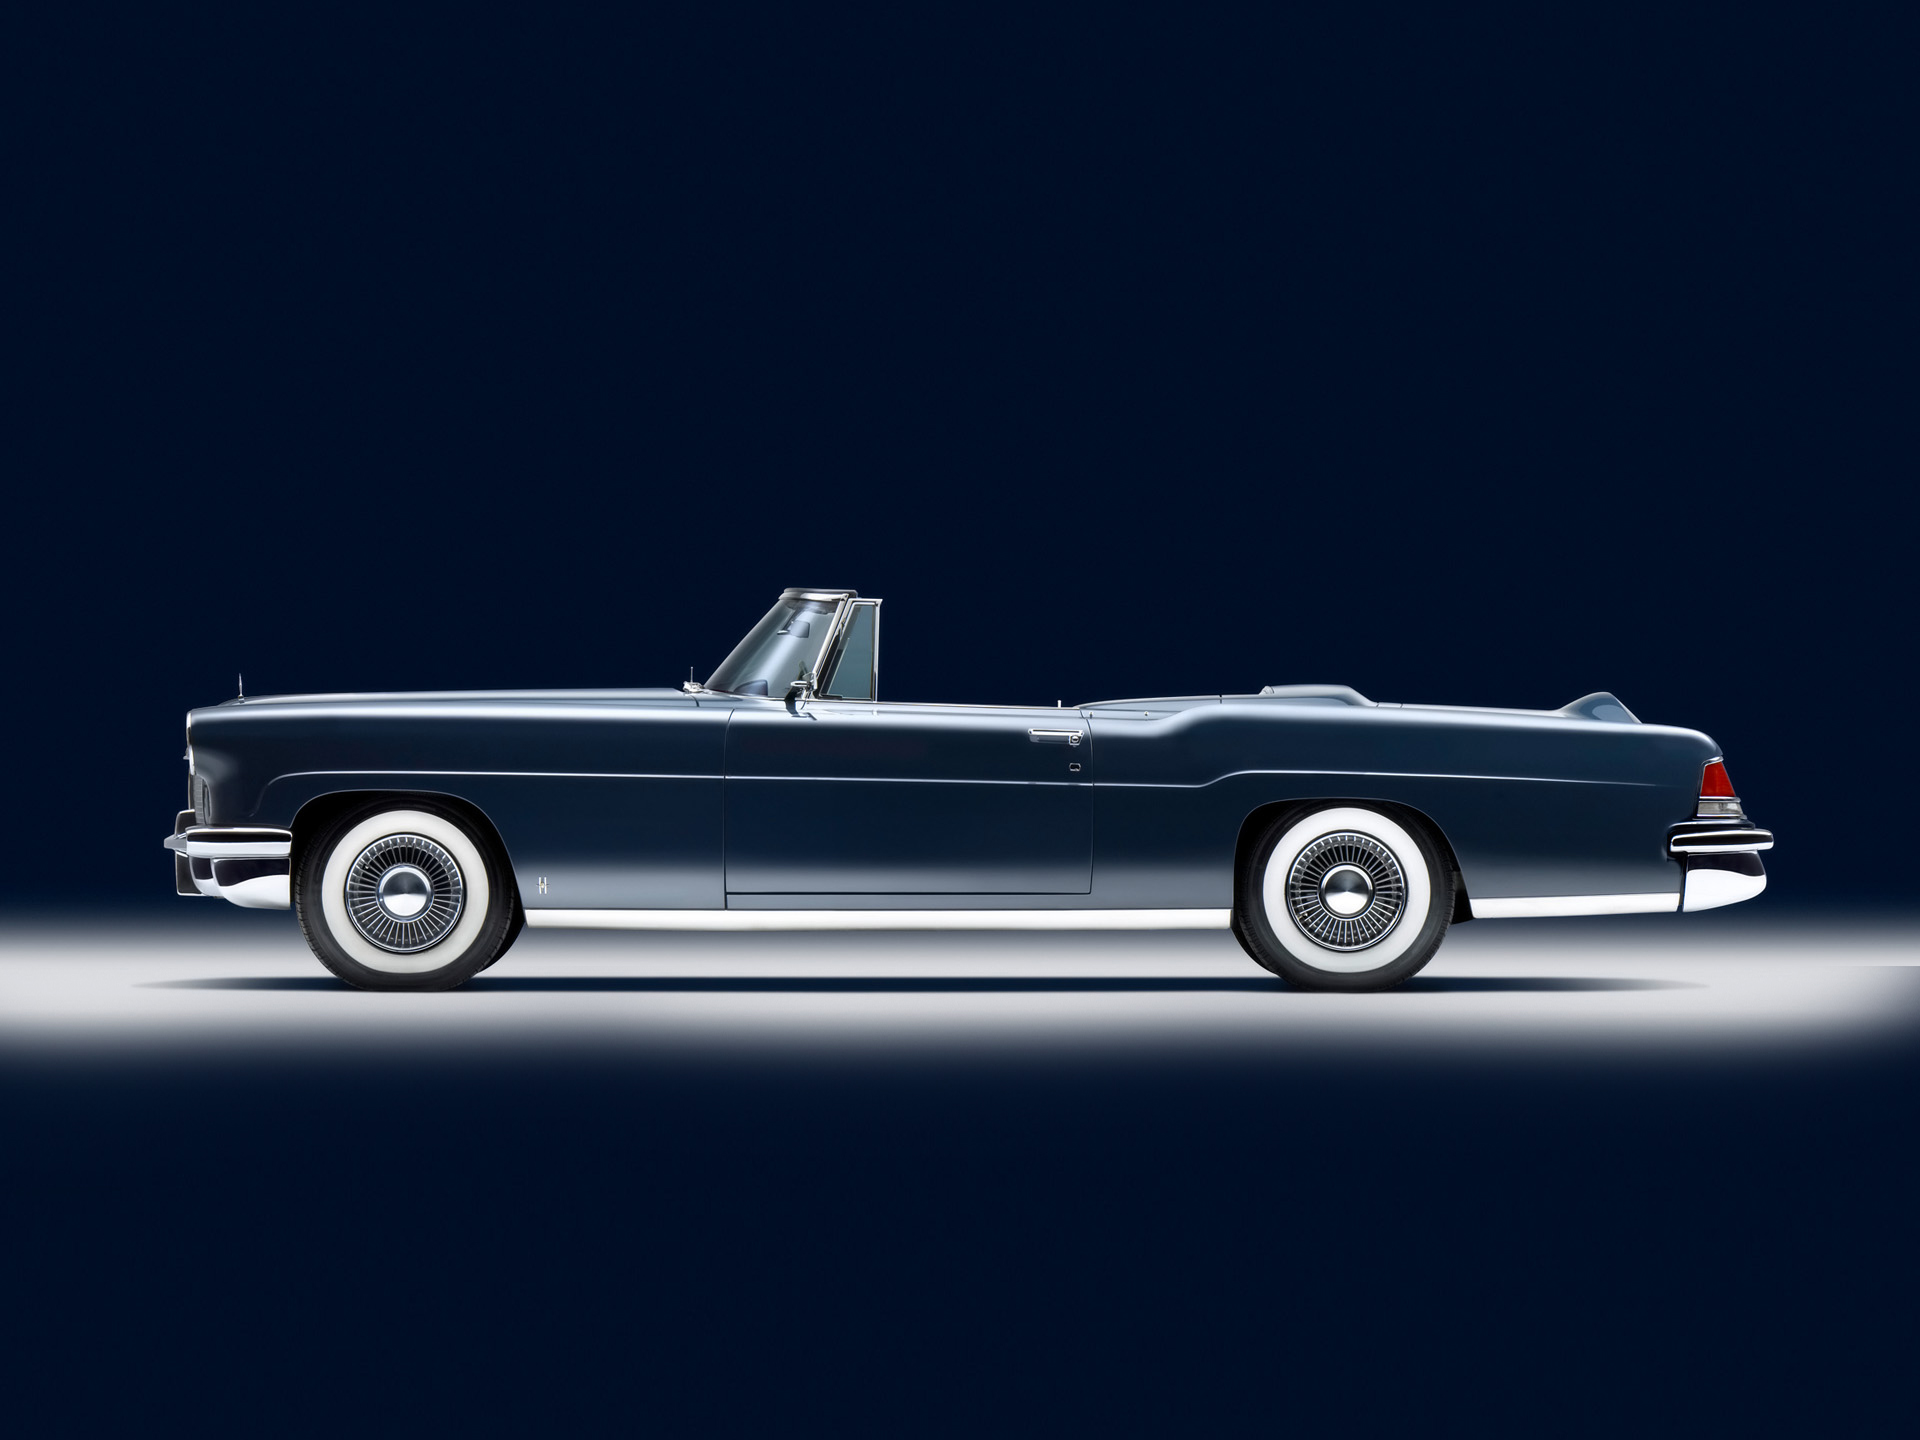 Continental Mark II Convertible by Hess & Eisenhardt, 1956 - Photo: Kevin Pearce